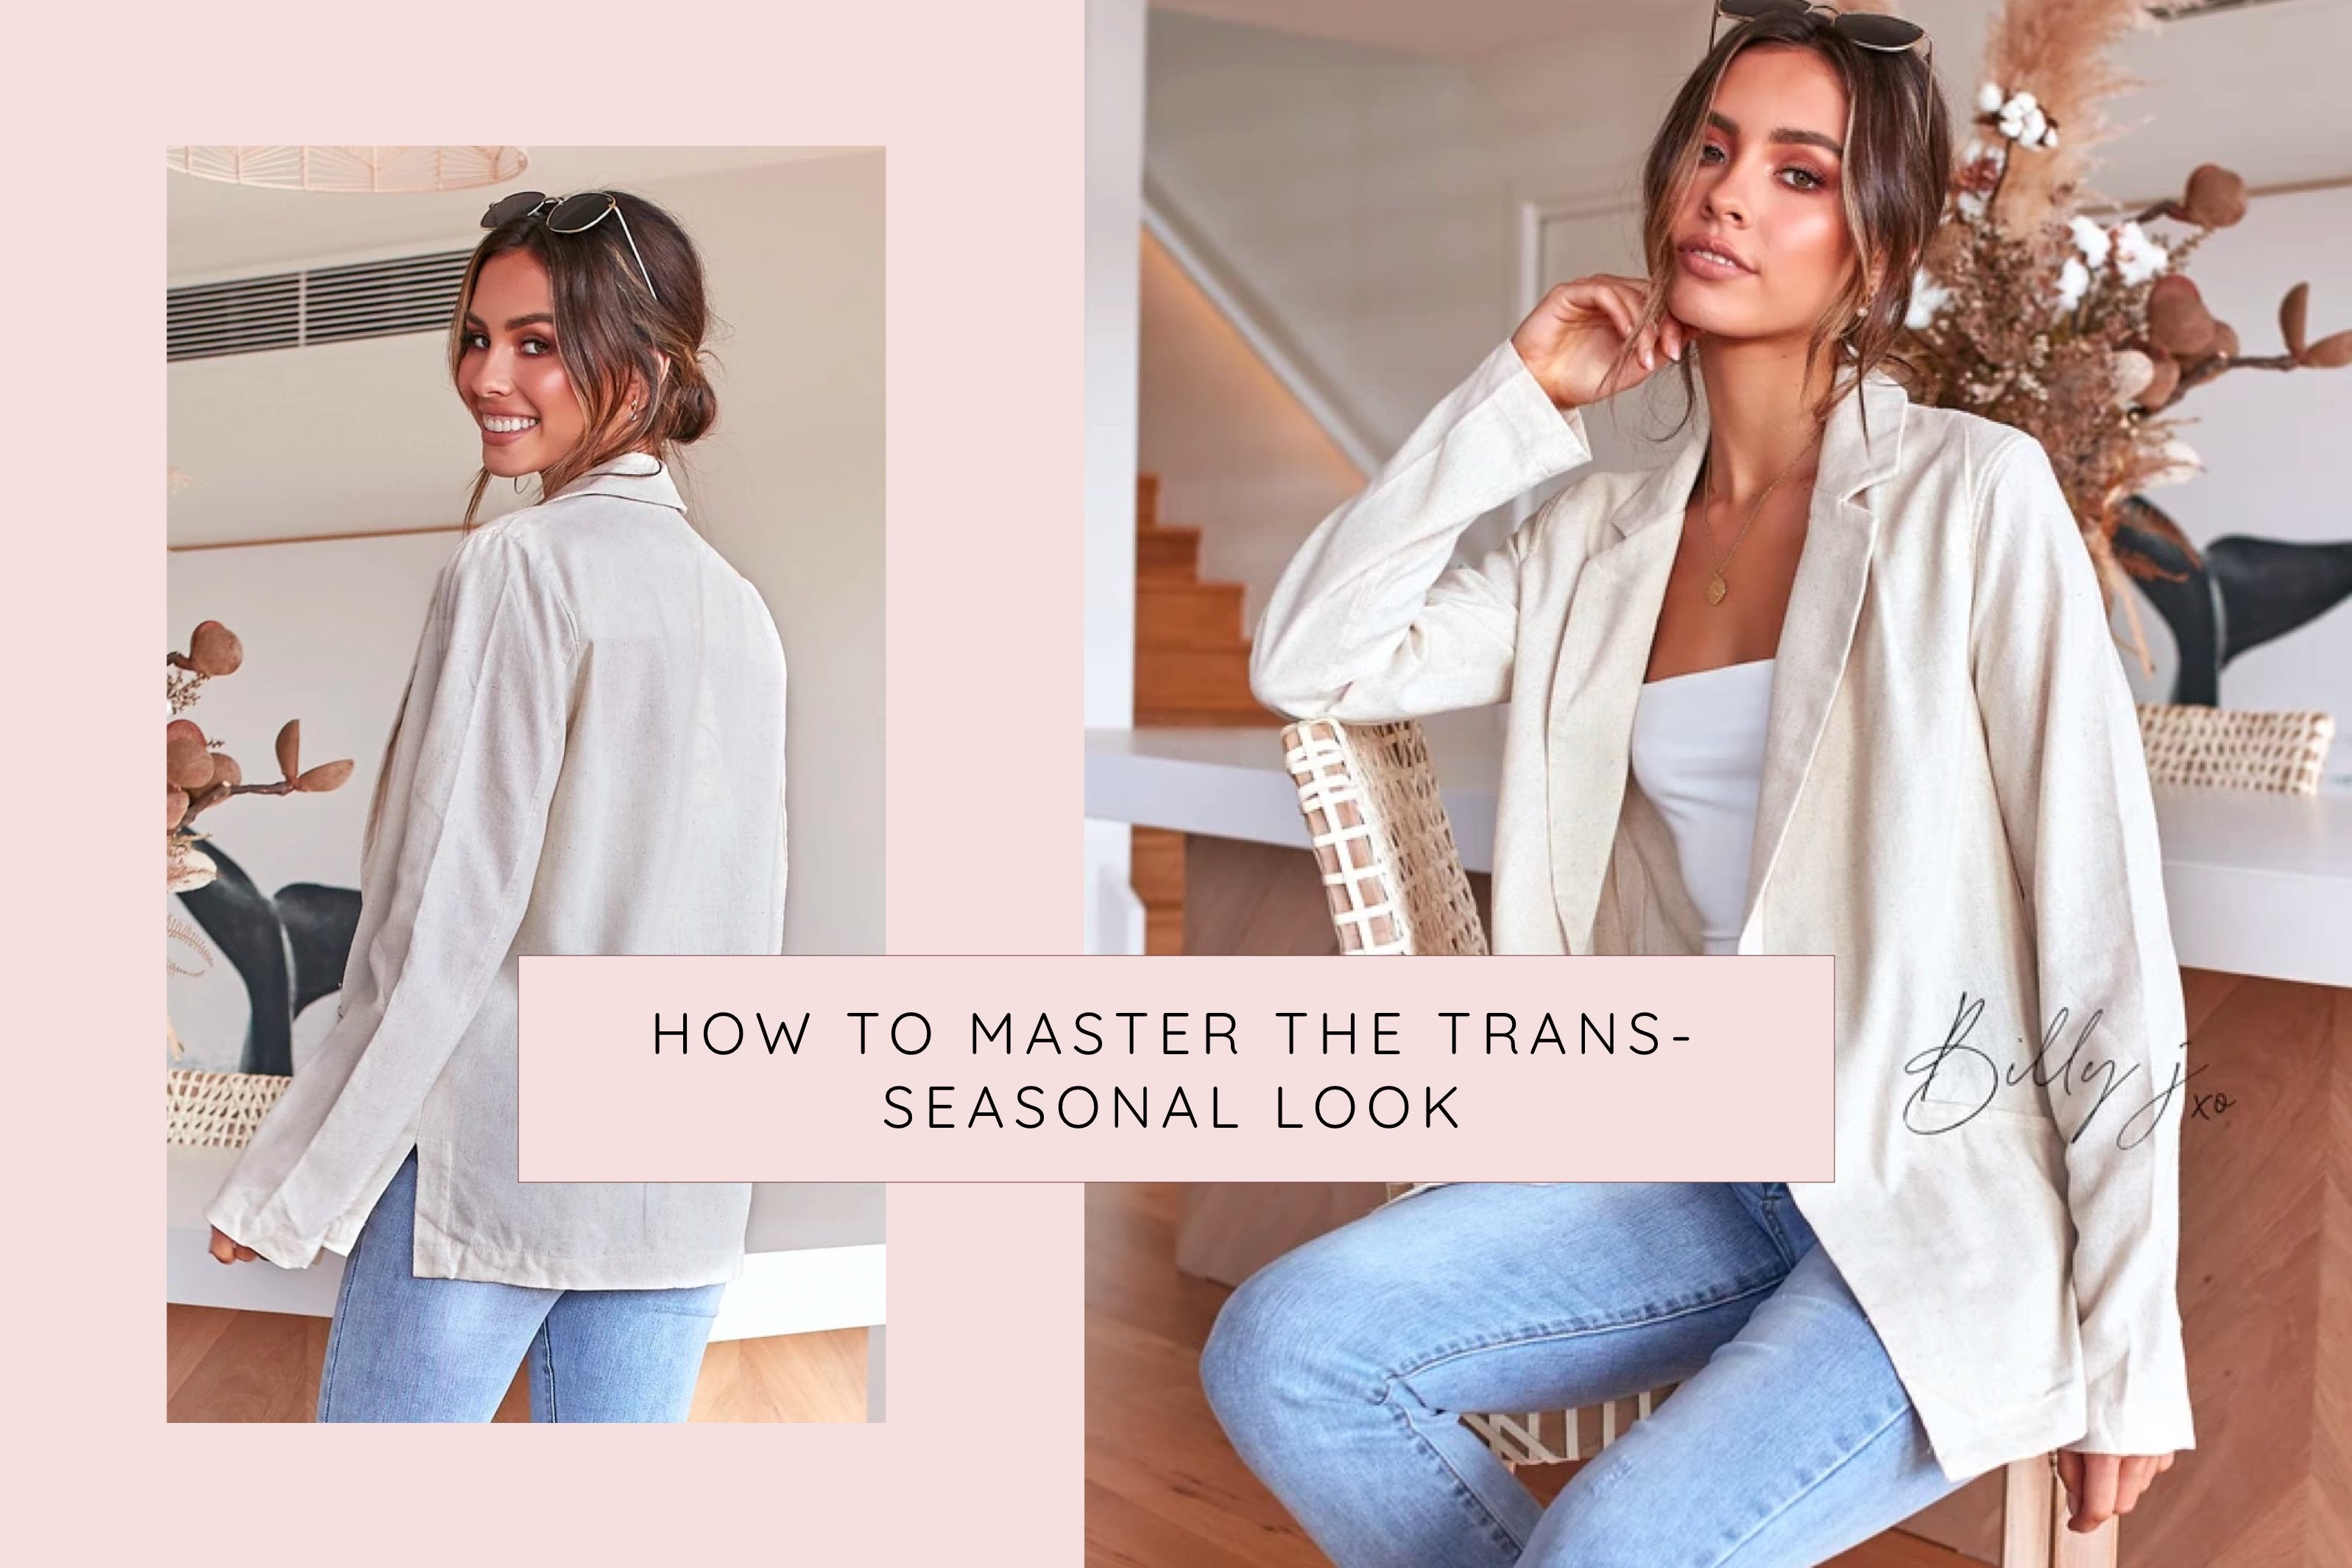 How to master the trans-seasonal look